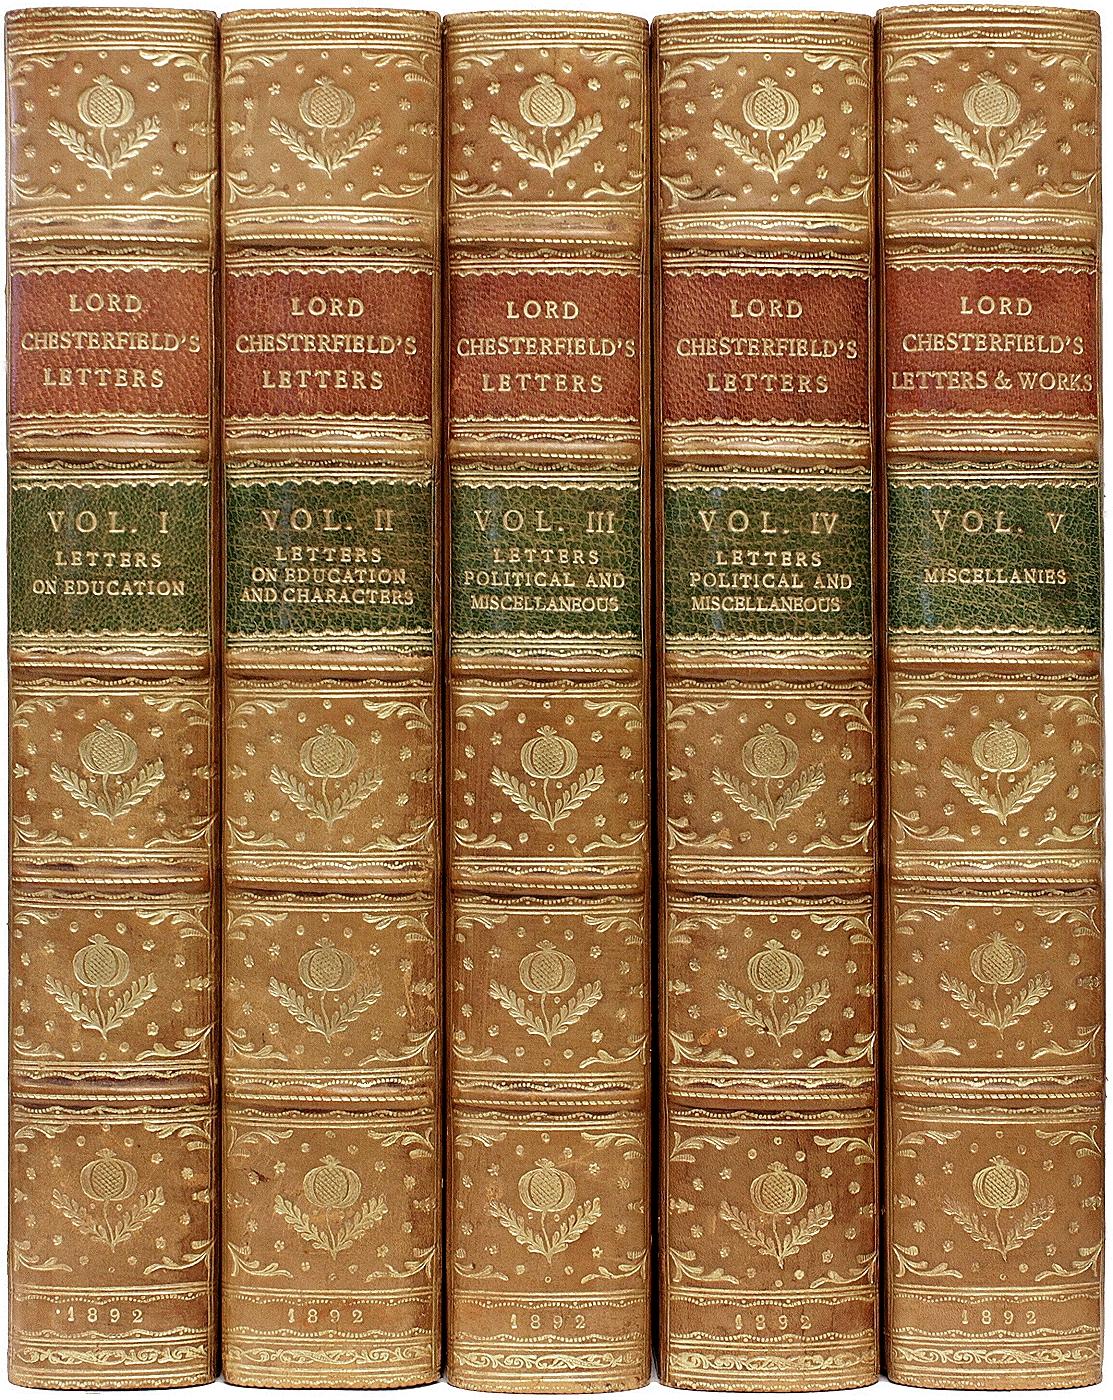 AUTHOR: MAHON, Lord. 

TITLE: The Letters Of Philip Dormer Stanhope, Earl Of Chesterfield; Including Numerous Letters Now First Published From The Original Manuscripts.

PUBLISHER: London: J. B. Lippincott Co., 1892.

DESCRIPTION: 5 vols., 8-7/8